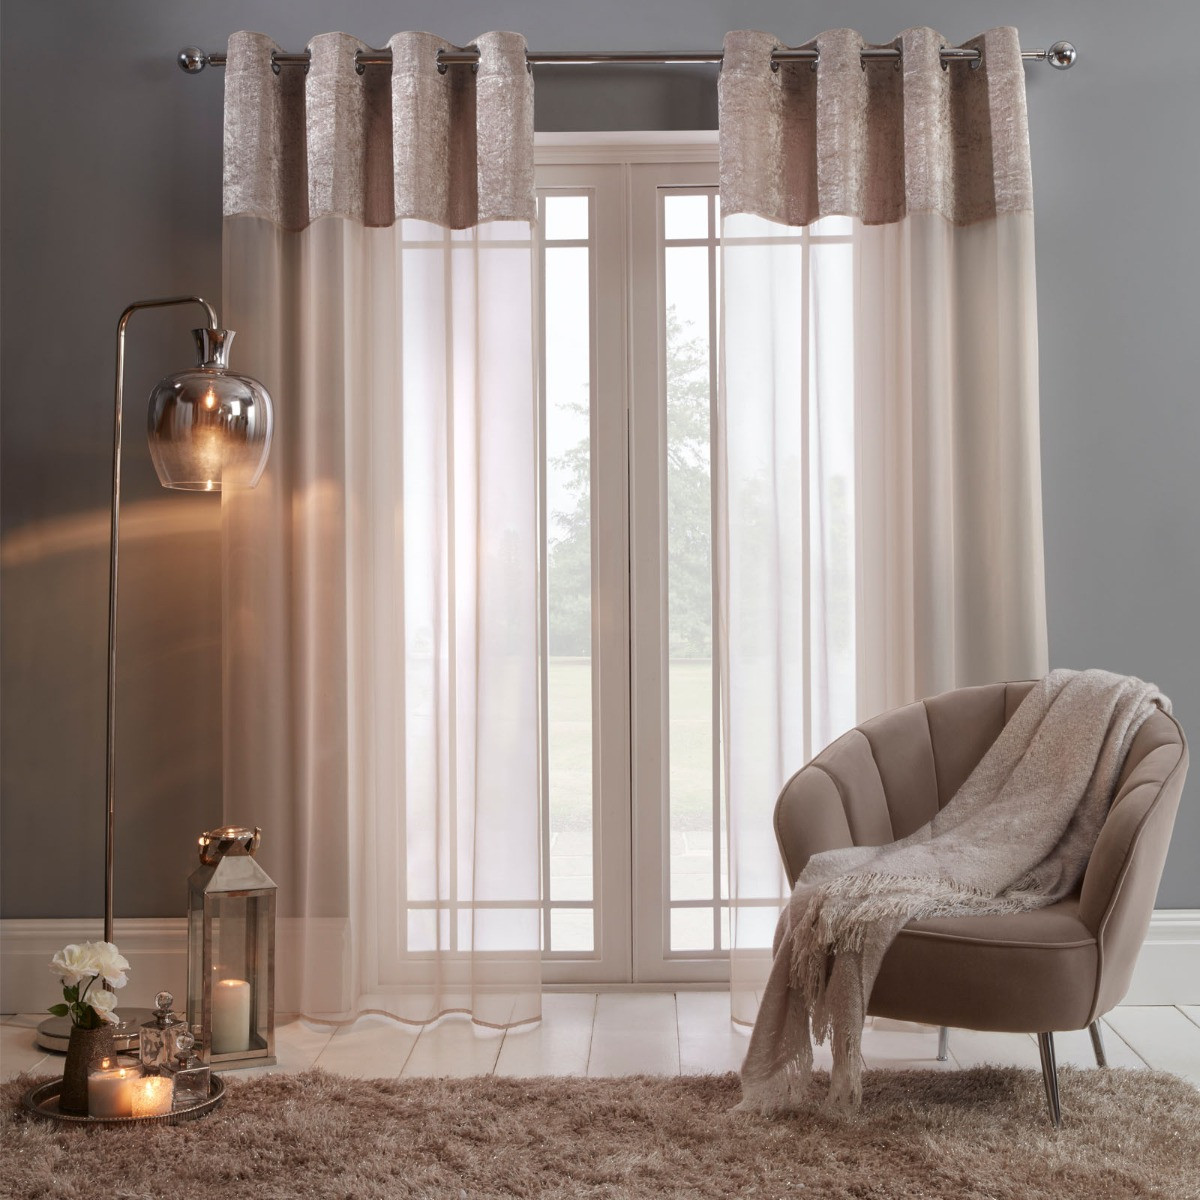 Sienna Crushed Velvet Voile Curtains, Natural - 55" x 87">